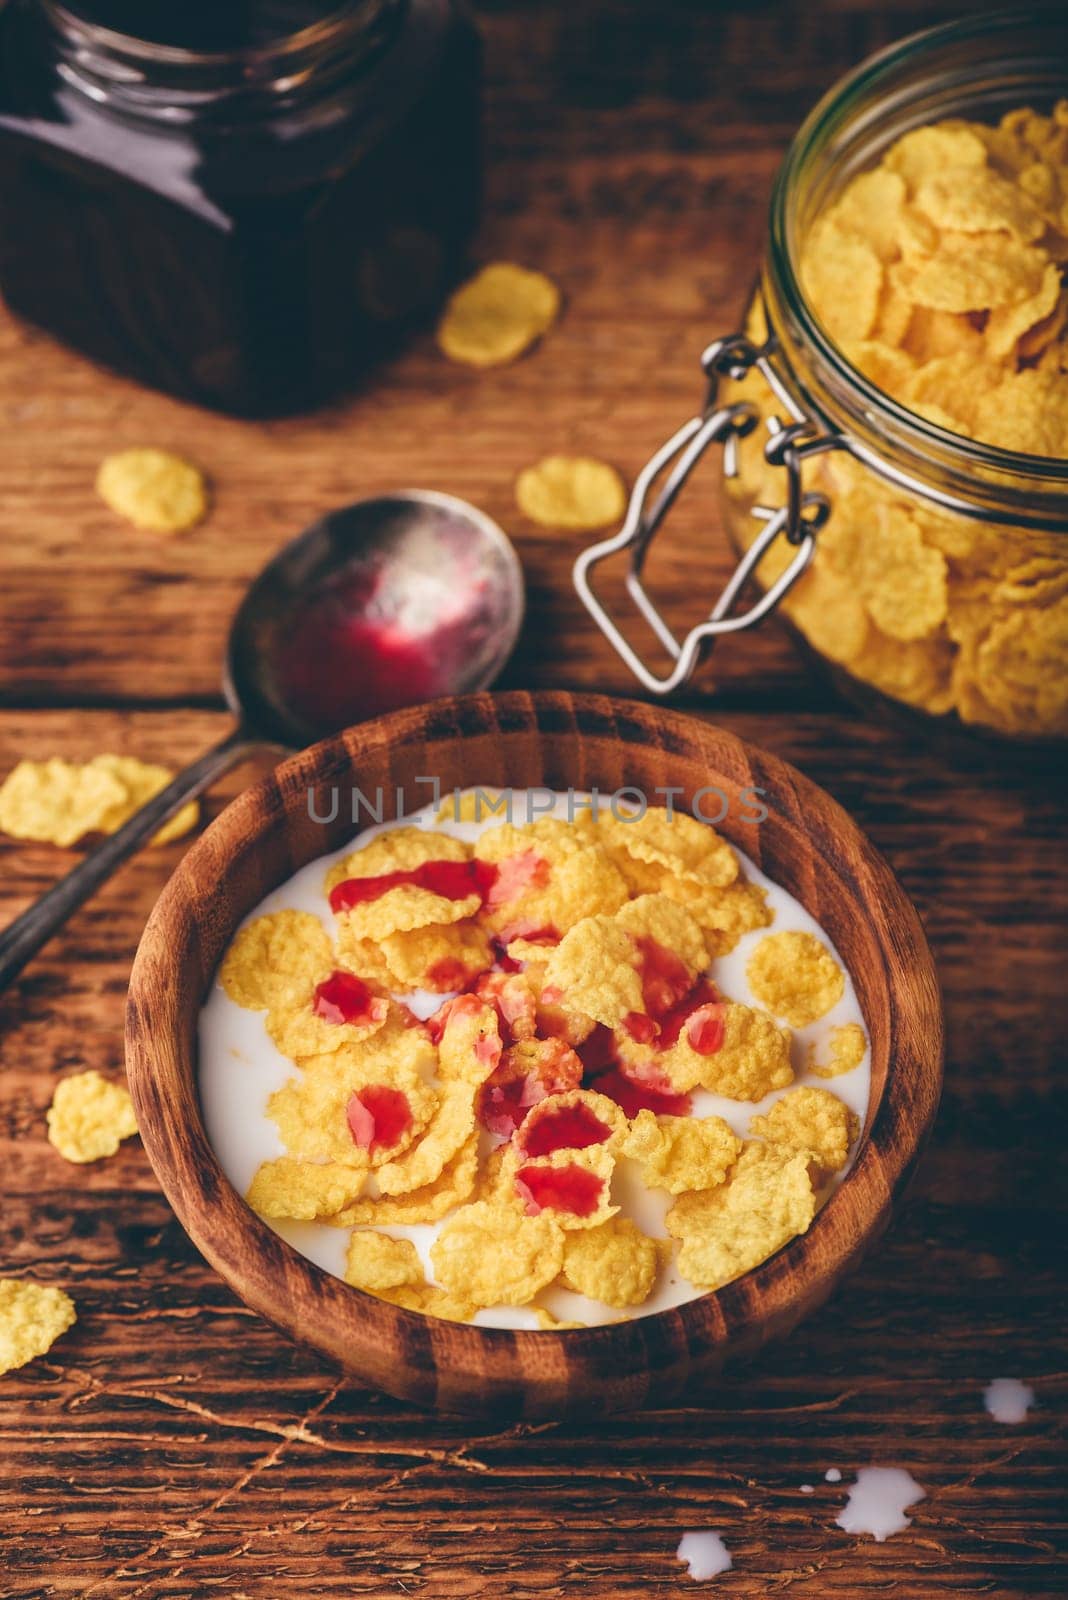 Breakfast with corn flakes, milk and berry syrup by Seva_blsv